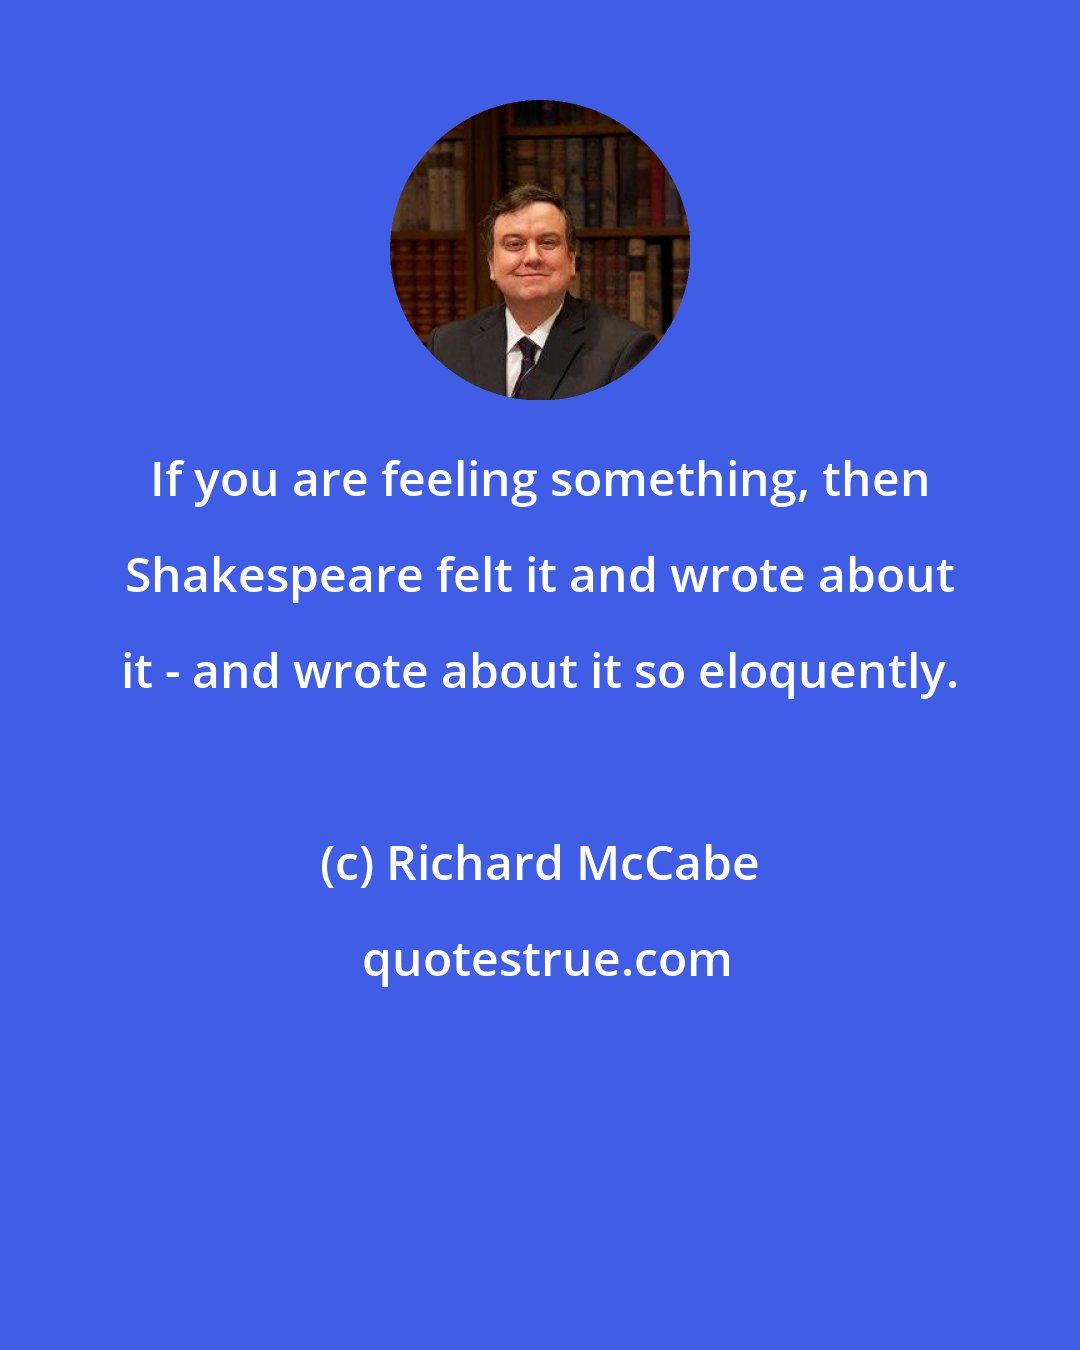 Richard McCabe: If you are feeling something, then Shakespeare felt it and wrote about it - and wrote about it so eloquently.